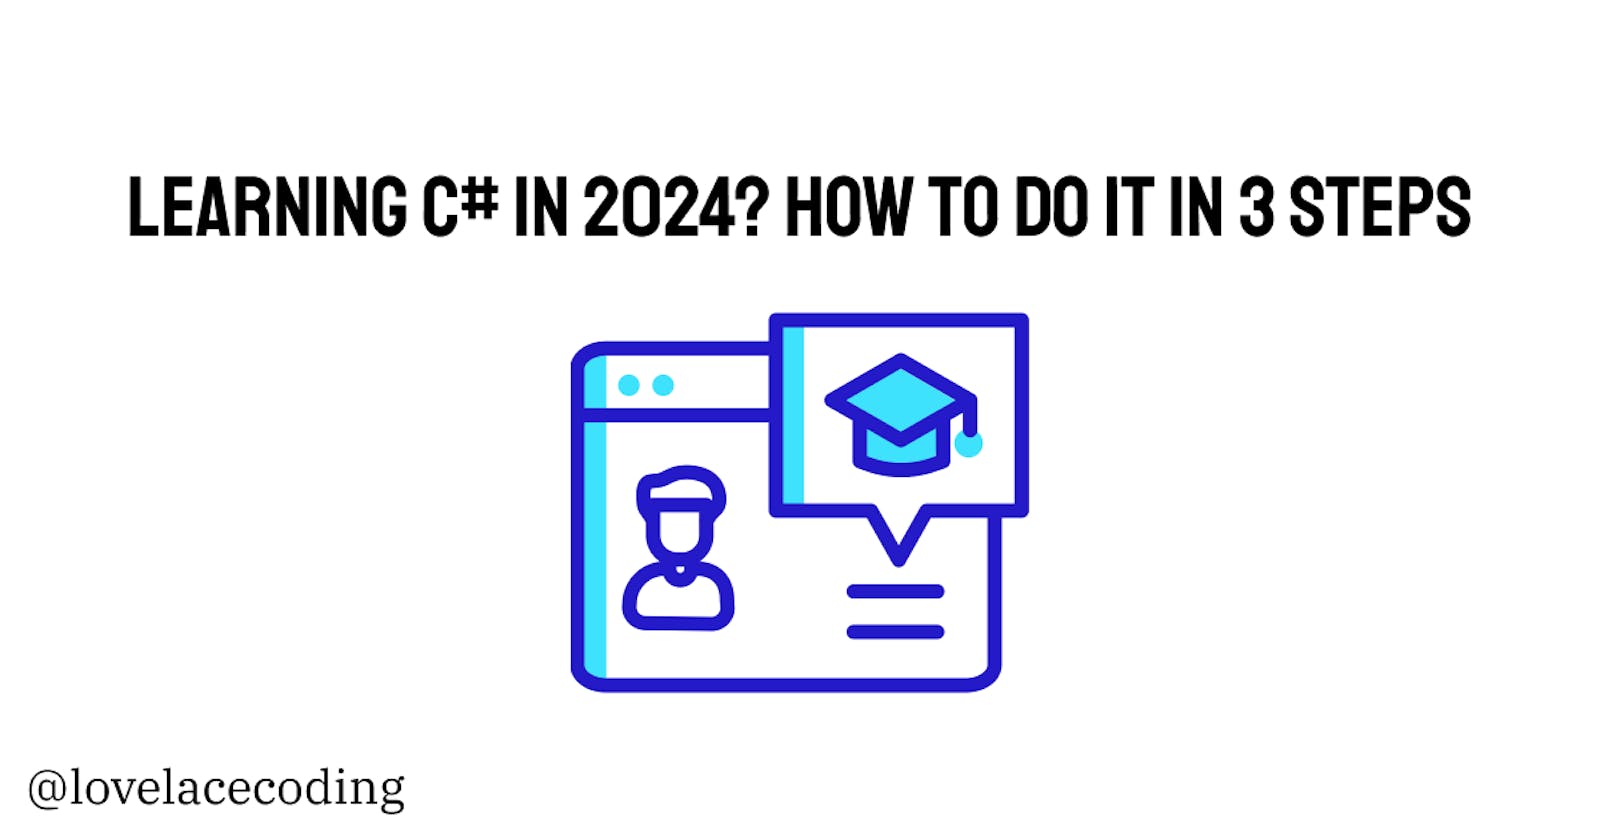 Learning C# in 2024? How to do it in 3 steps